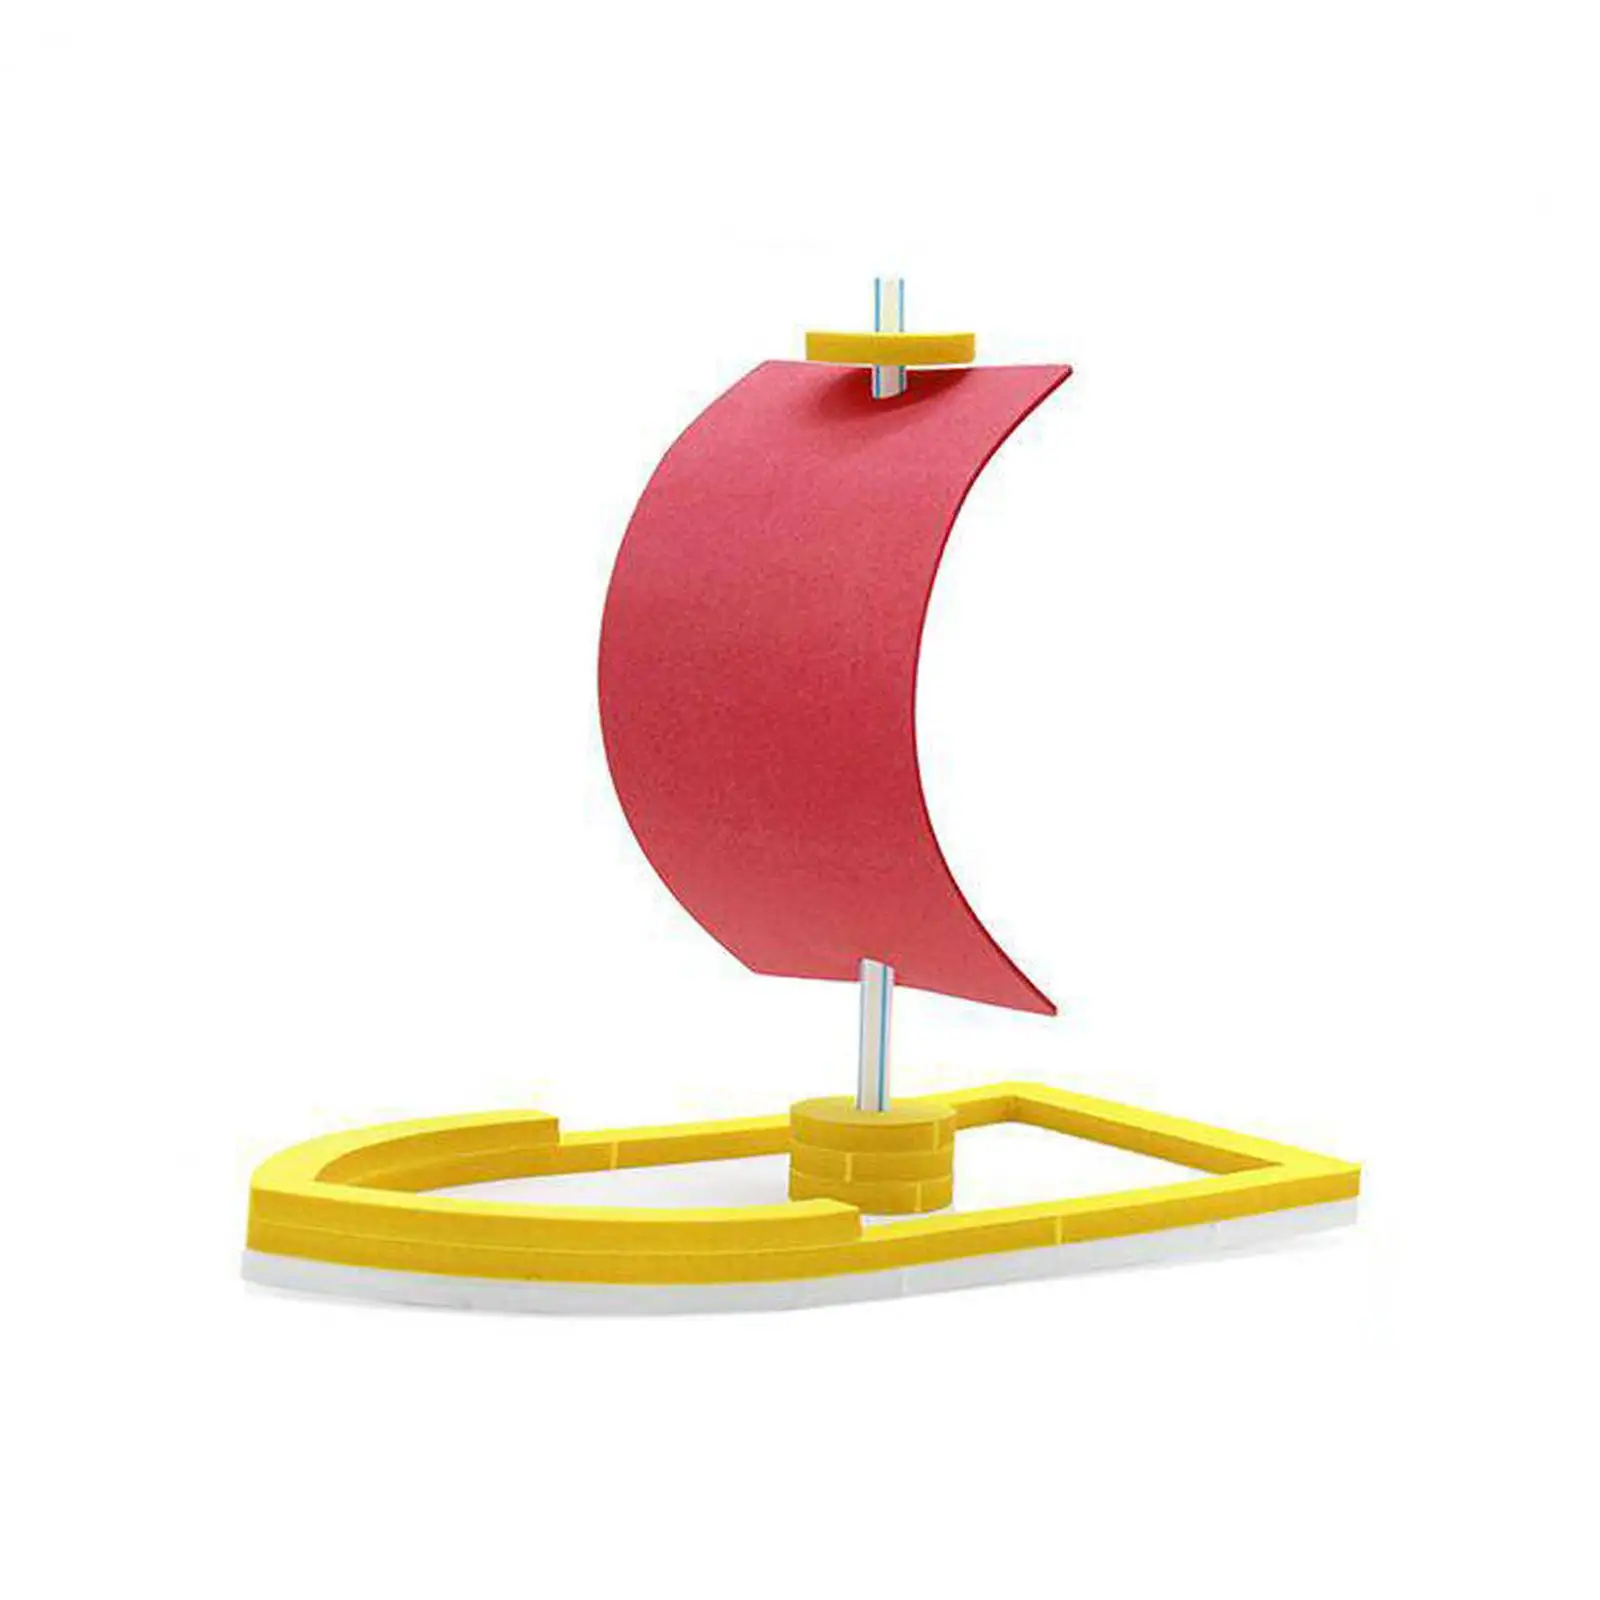 Sailboat Science Projects Experiment Kits Creative Novelty for Interaction